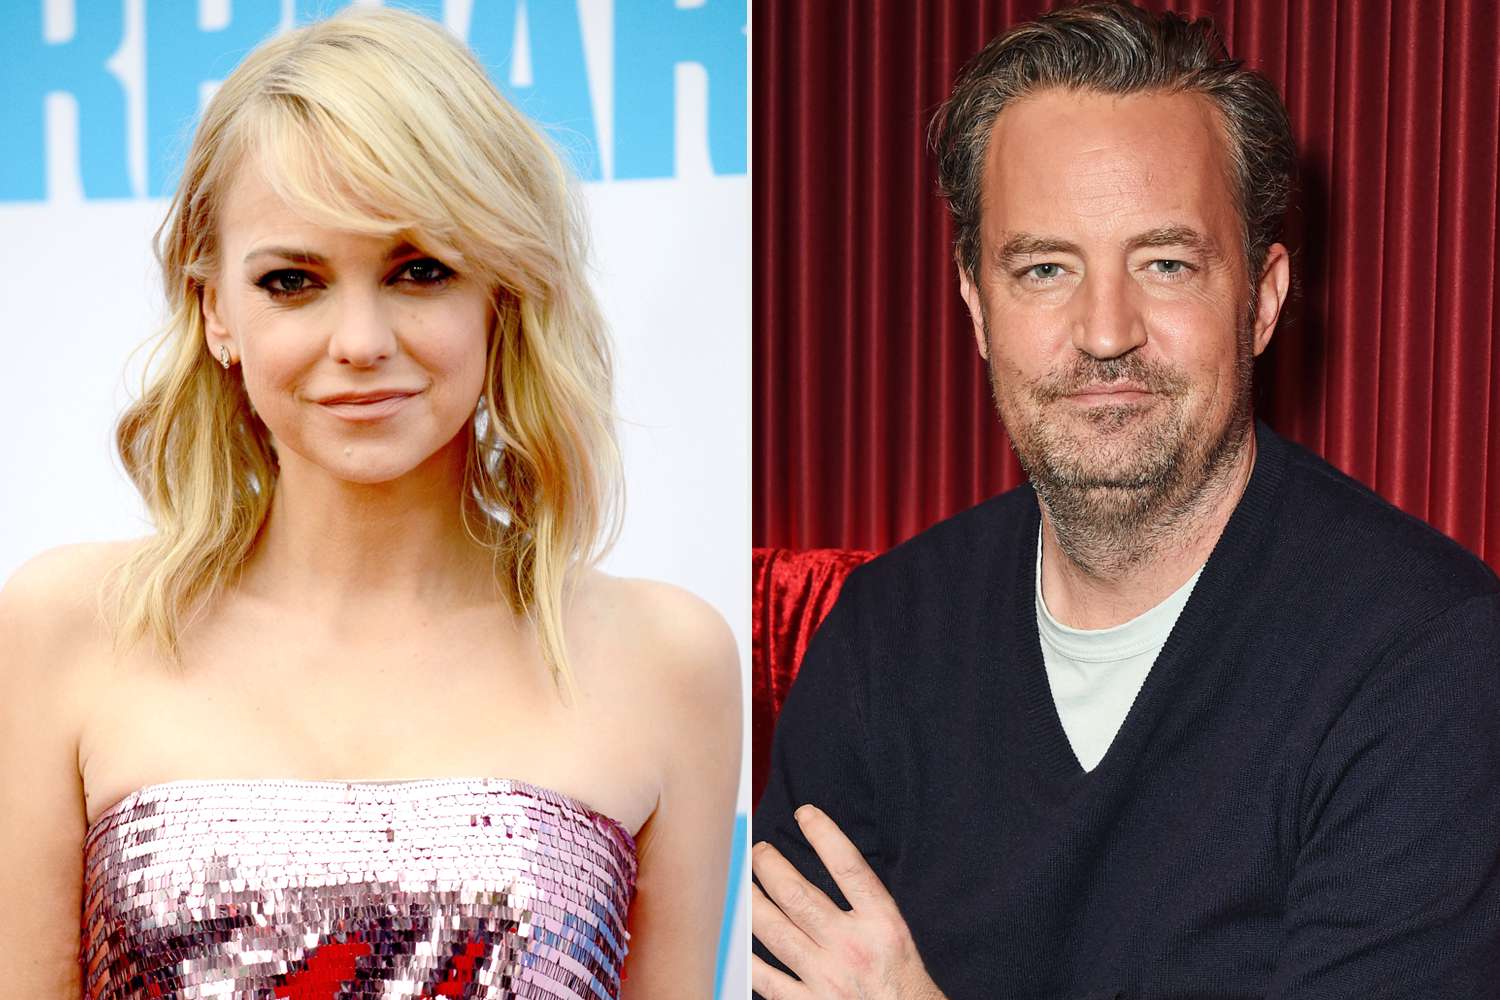 Anna Faris Says Working with 'Incredible' Matthew Perry on Friends Final Season 'Was an Honor' (Exclusive)